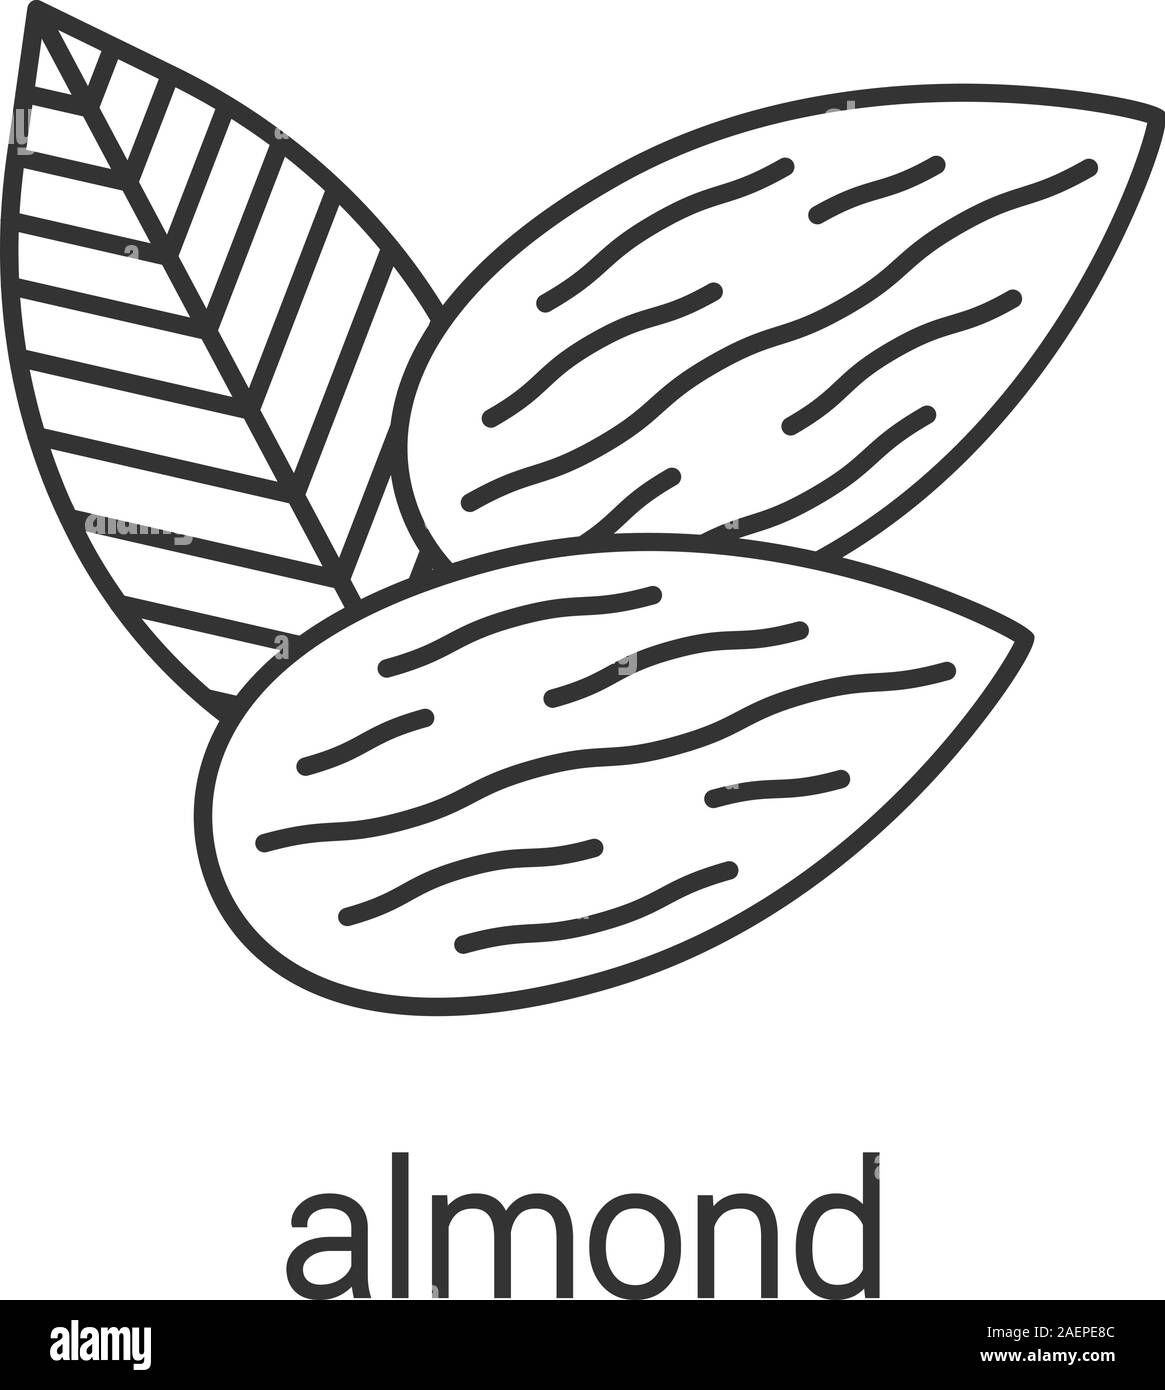 How to draw Almond - YouTube